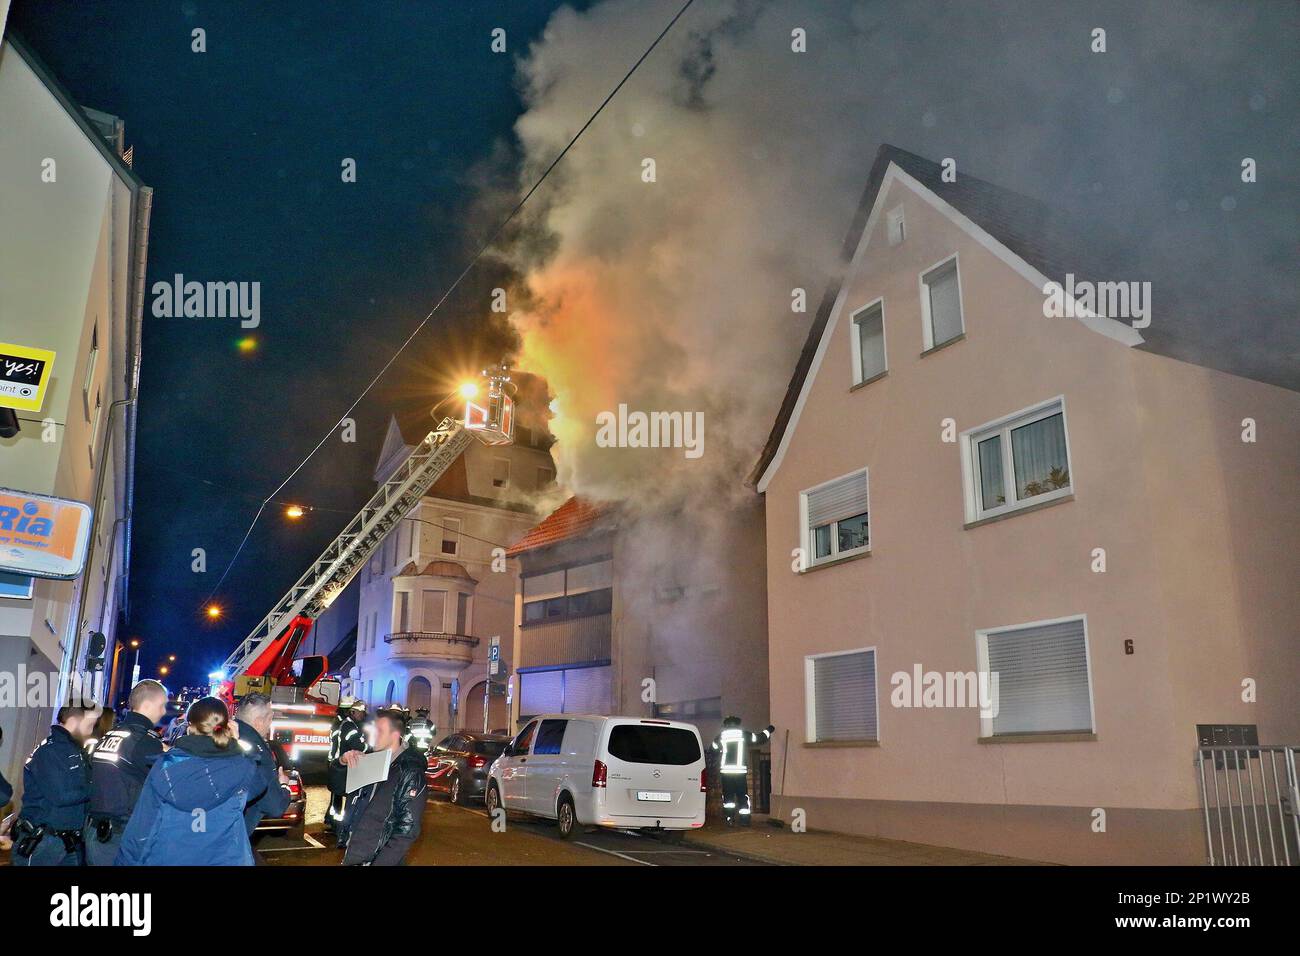 Stuttgart, Germany. 04th Mar, 2023. Emergency personnel stand in front of a residential building during firefighting operations while firefighters extinguish a roof truss fire. According to initial estimates, around 700,000 euros in damage was caused by an attic fire. Rescue workers took a 93-year-old resident of the attic apartment to hospital with smoke inhalation, according to a police spokesman. Credit: Karsten Schmalz/KS-Images.de/dpa/Alamy Live News Stock Photo